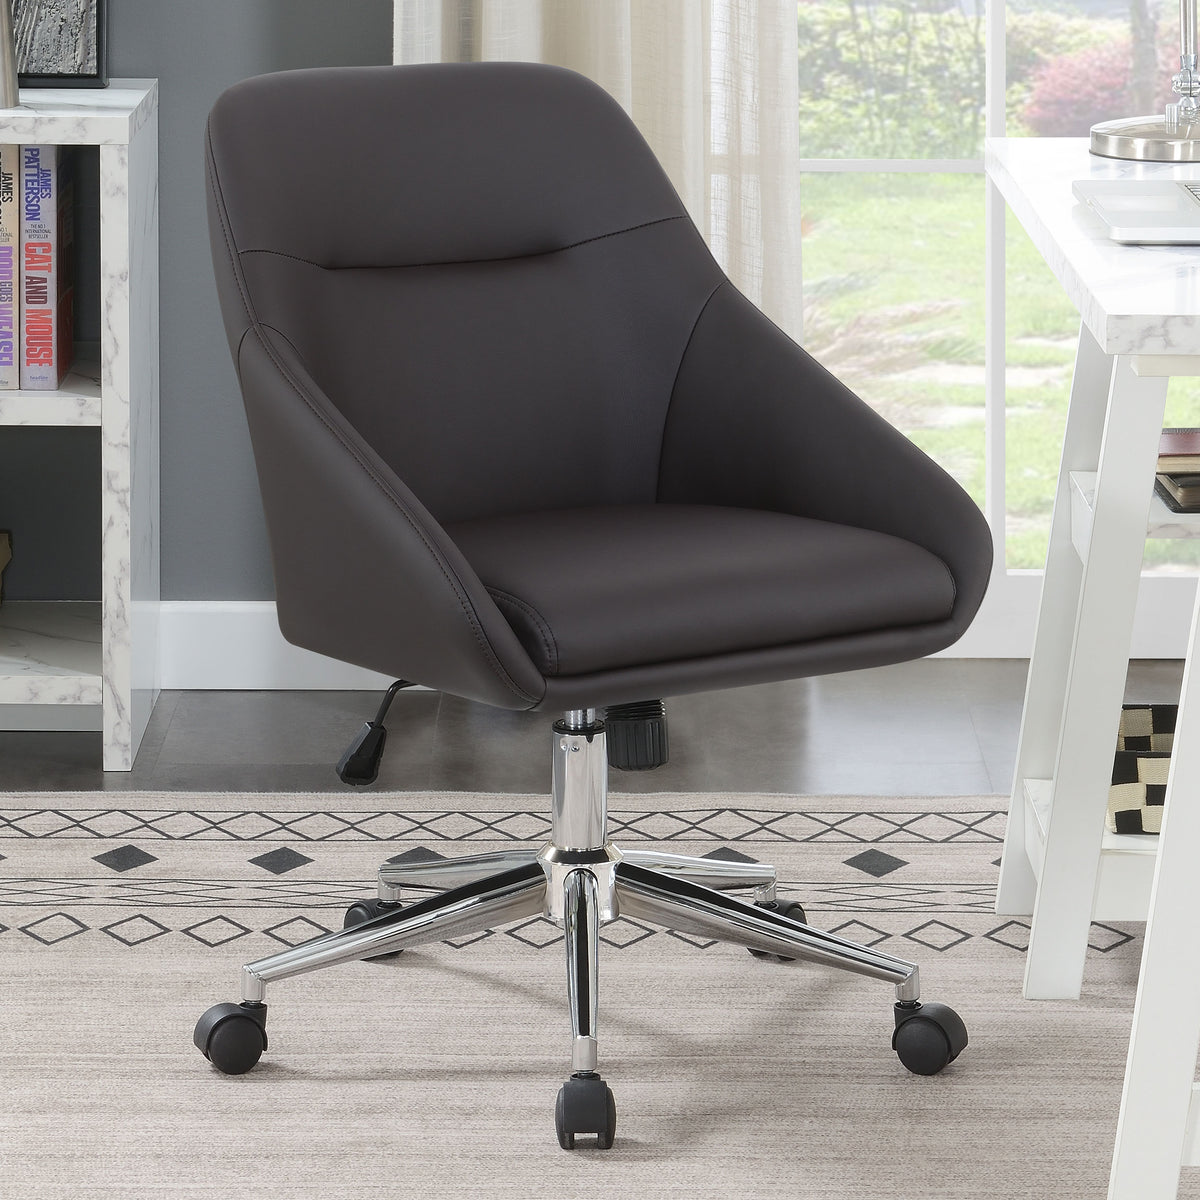 Jackman Upholstered Office Chair with Casters Jackman Upholstered Office Chair with Casters Half Price Furniture